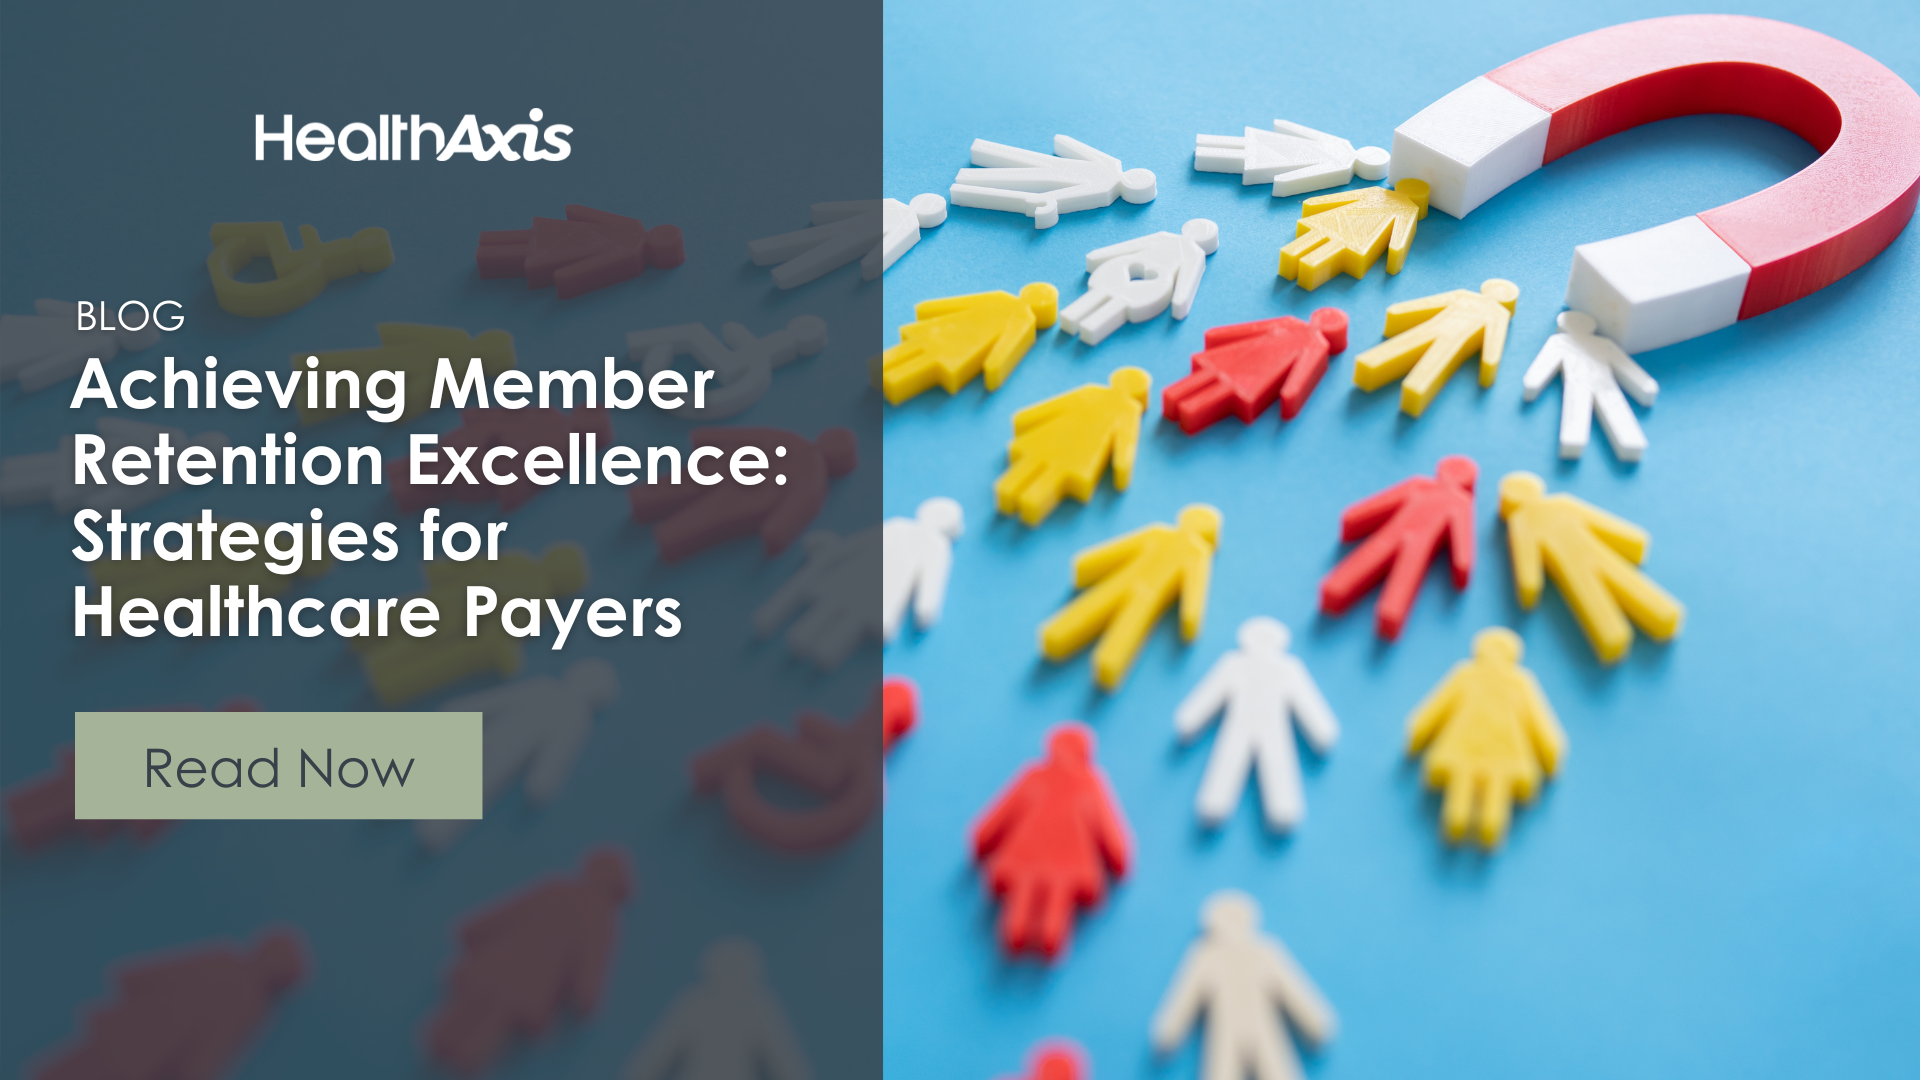 Achieving Member Retention Excellence: Strategies for Healthcare Payers